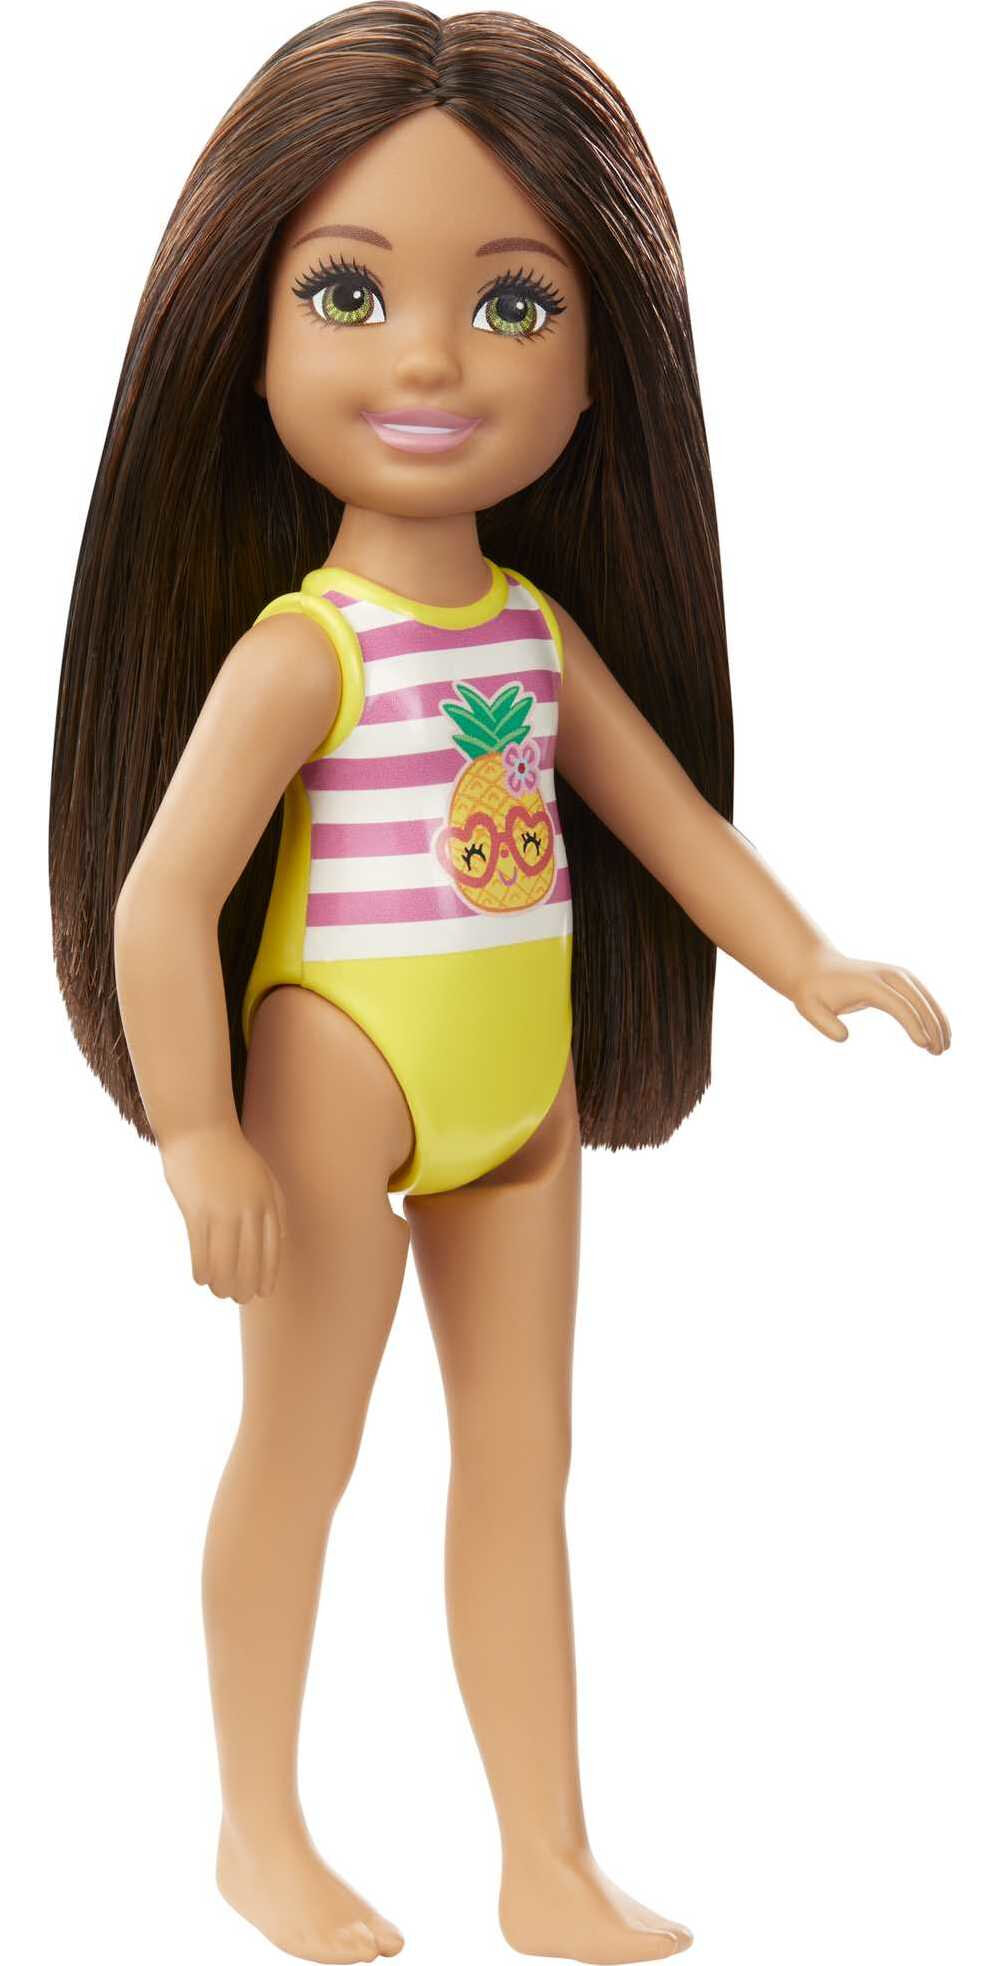 Barbie Club Chelsea Doll, Small Doll with Long Brown Hair, Green Eyes & Pineapple-Graphic Swimsuit - image 1 of 5